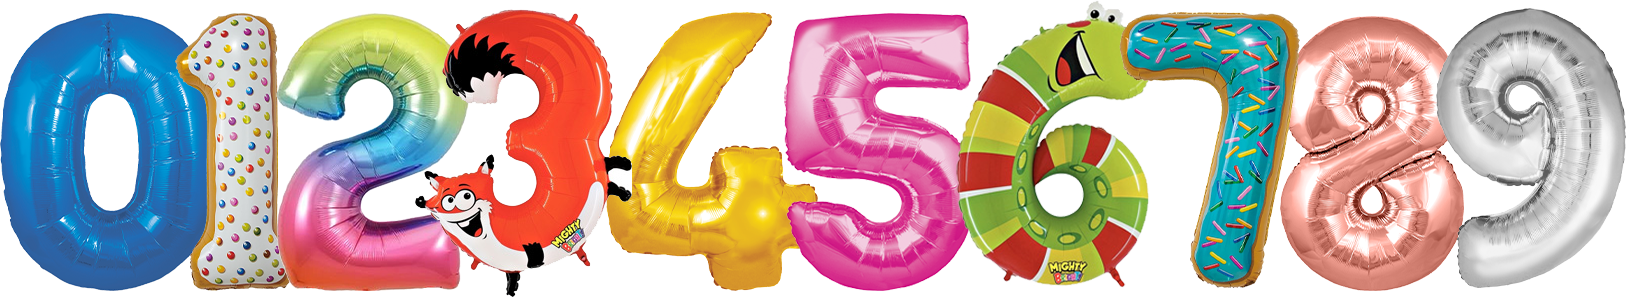 Our Range of Giant Number Balloons